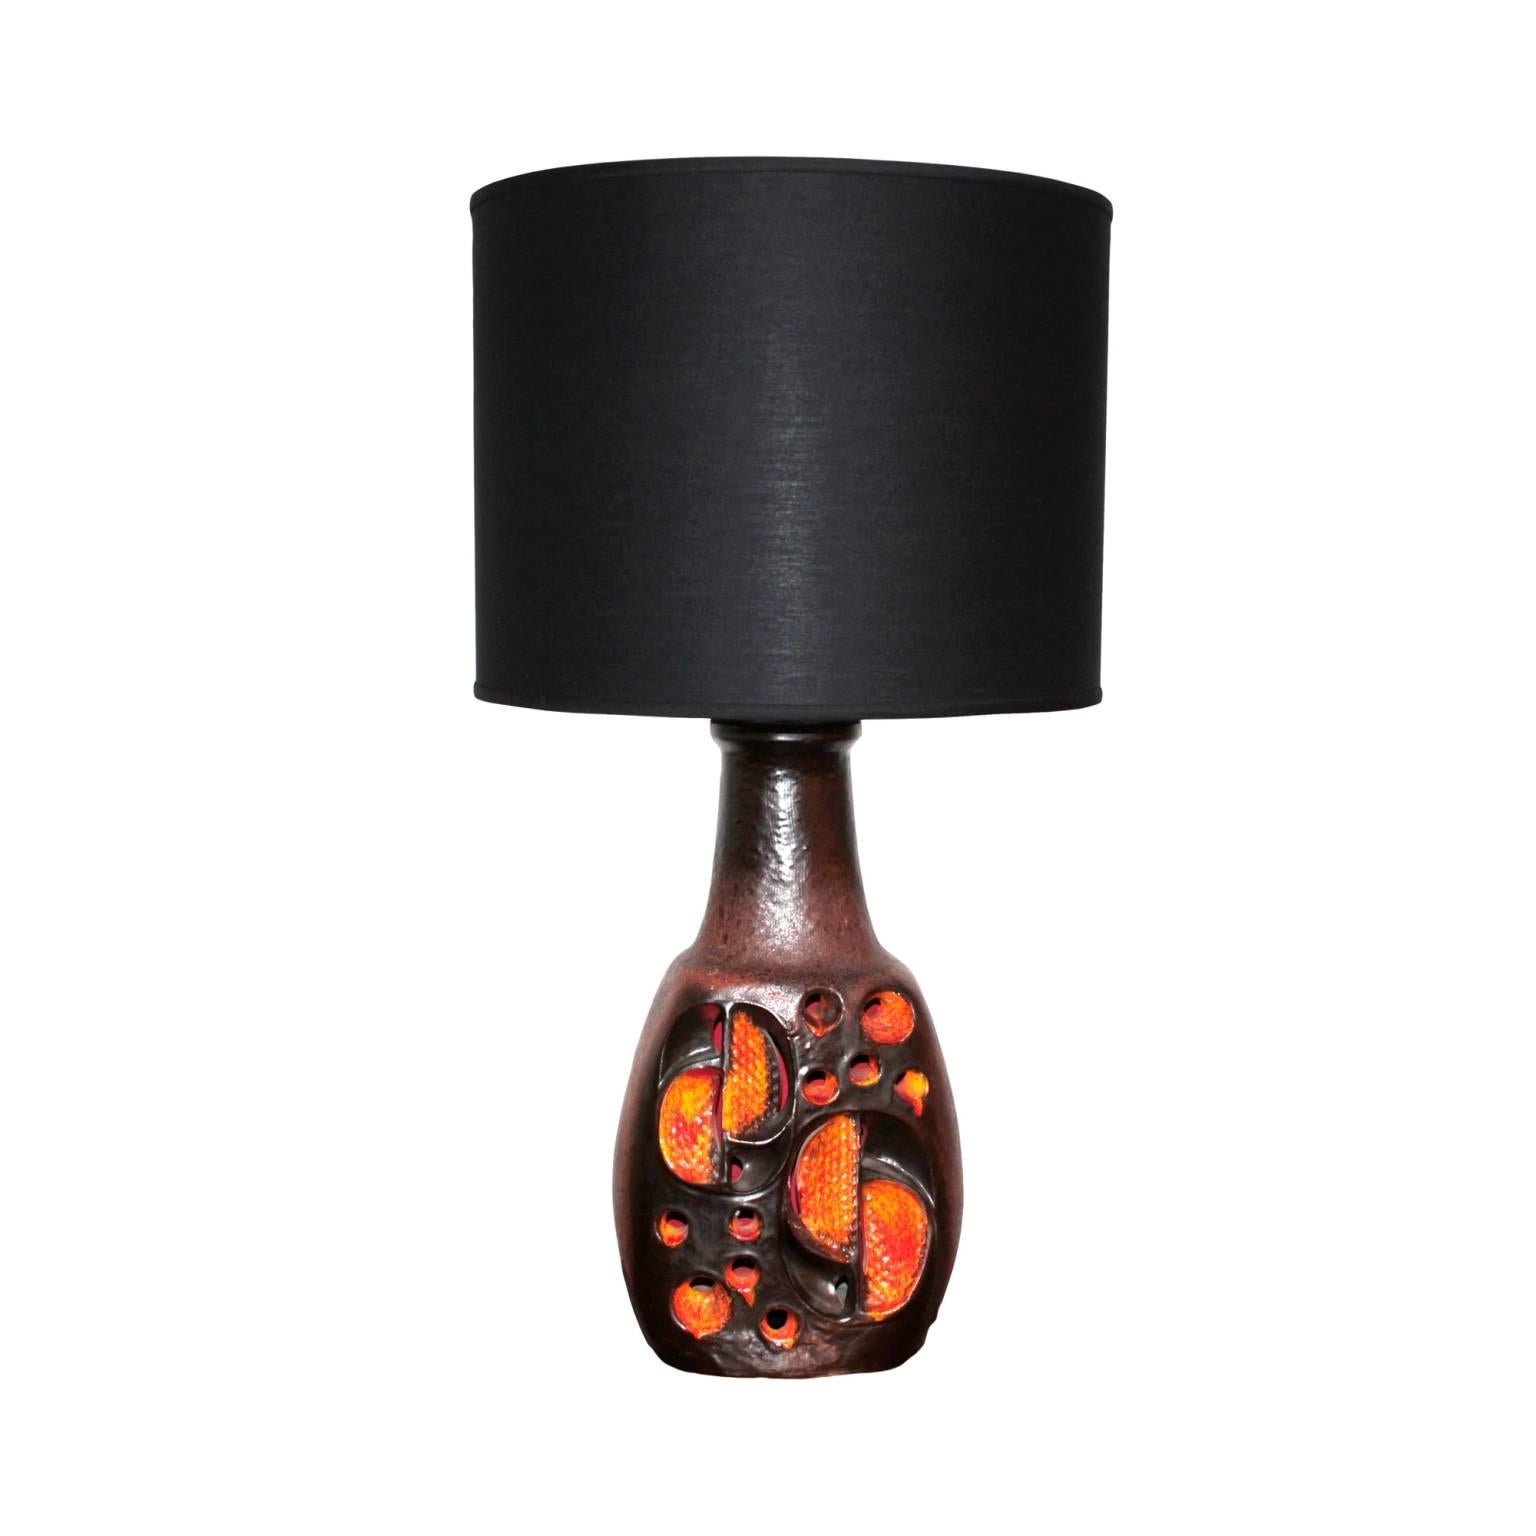 Vase shaped body in ceramic and glazed ceramic, interior fitted with a single light bulb; neck with single bulb and a large black cotton drum shade.